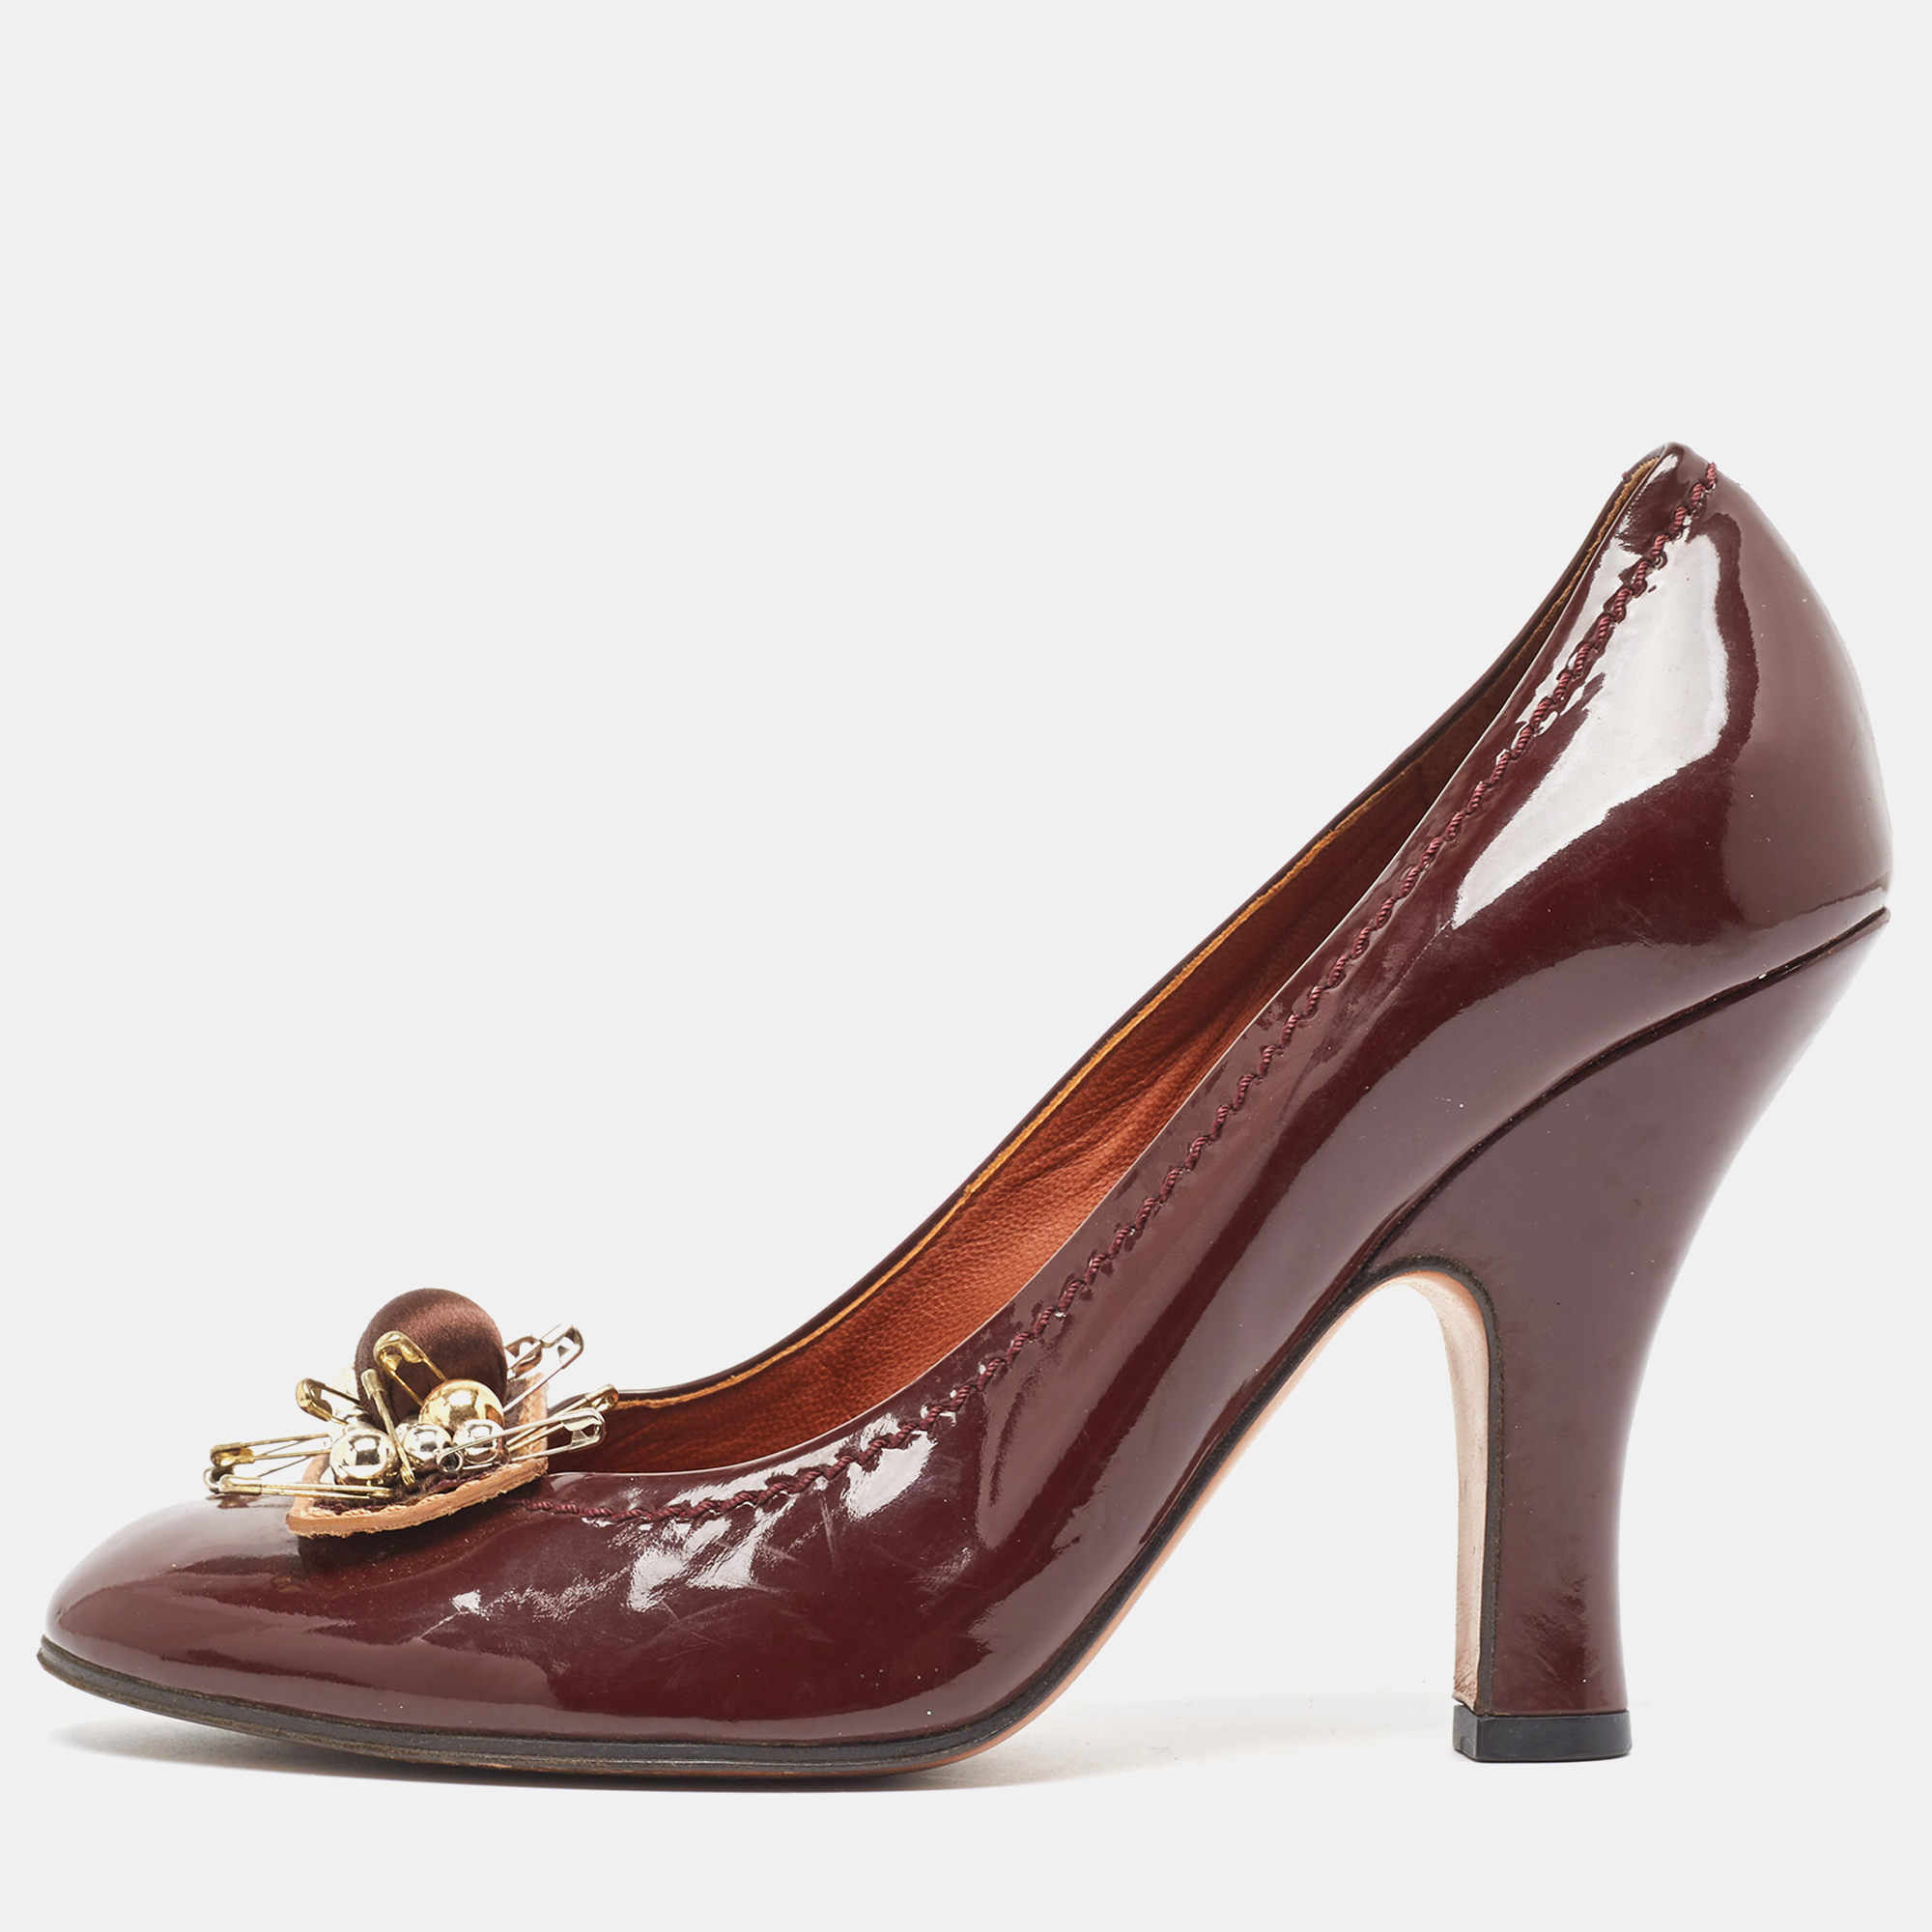 Pre-owned Marc Jacobs Burgundy Patent Leather Embellished Pumps Size 37.5